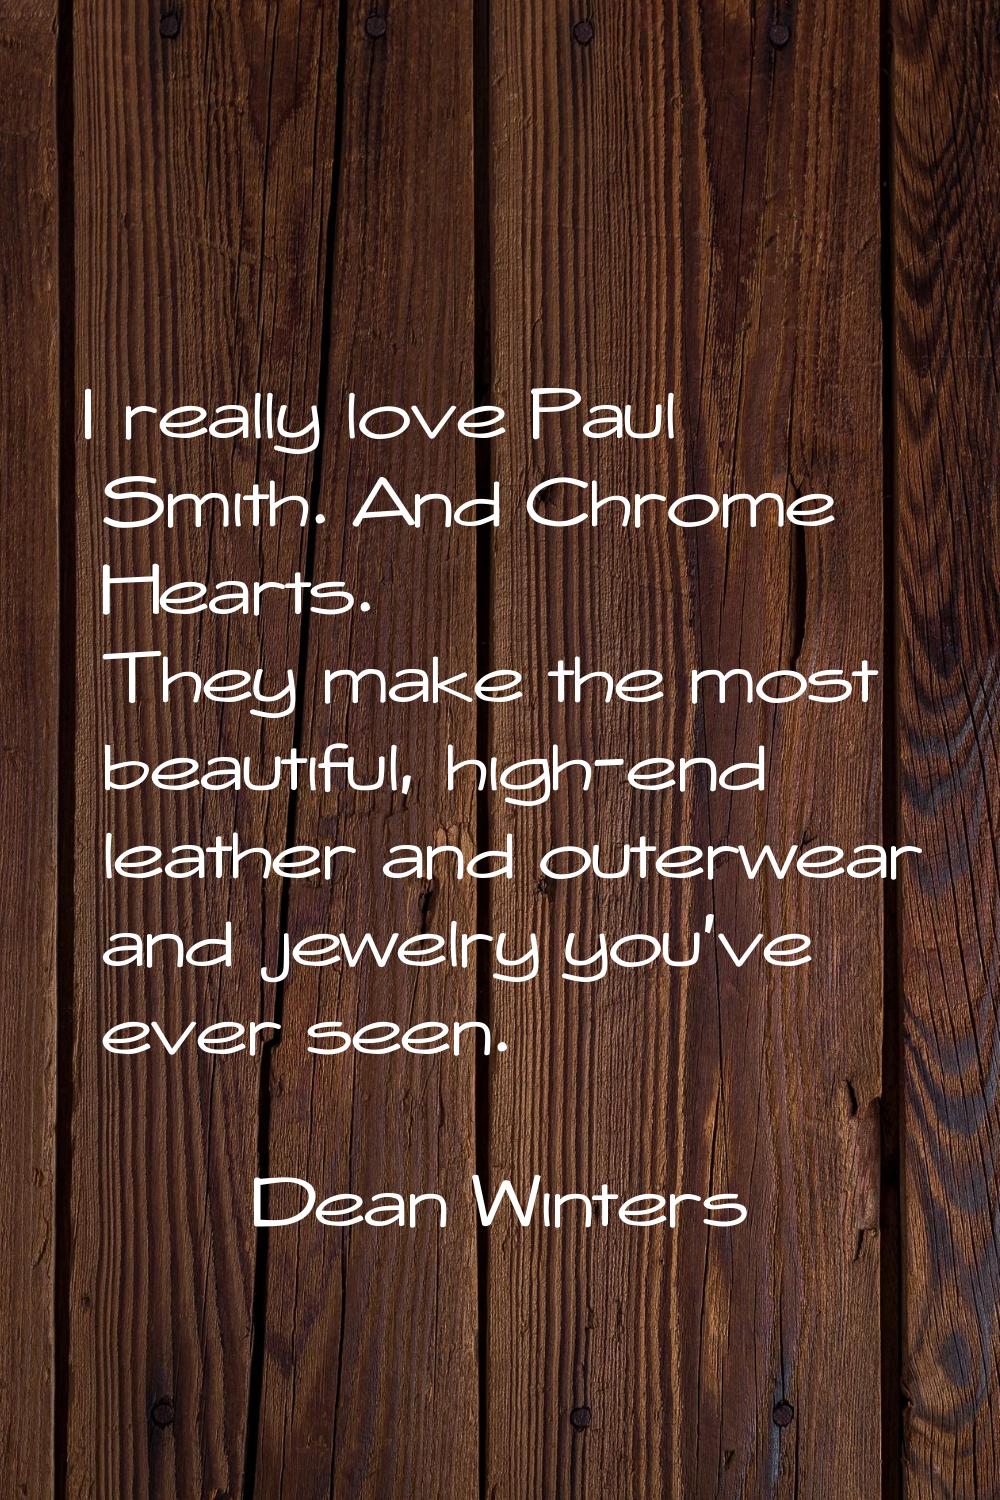 I really love Paul Smith. And Chrome Hearts. They make the most beautiful, high-end leather and out